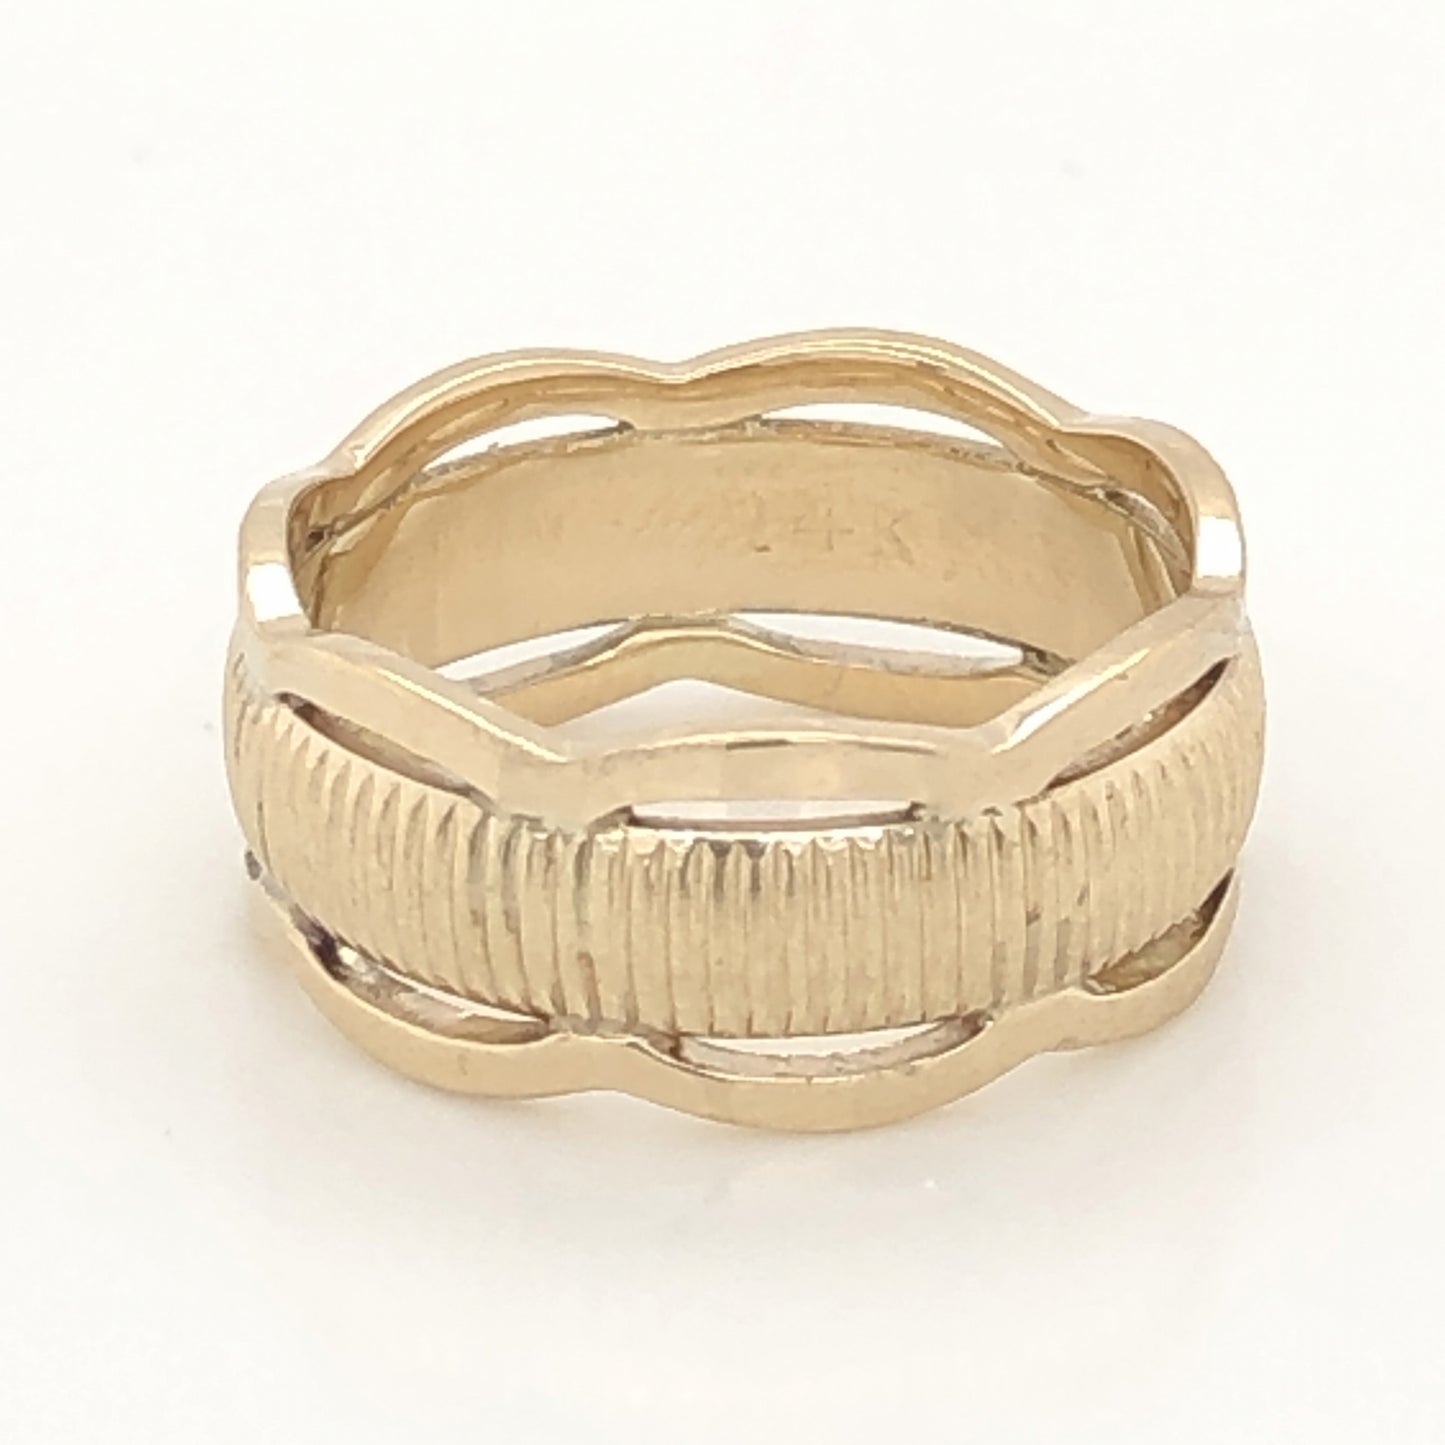 Vintage Mid-Century Wedding Band in 14k Yellow Gold